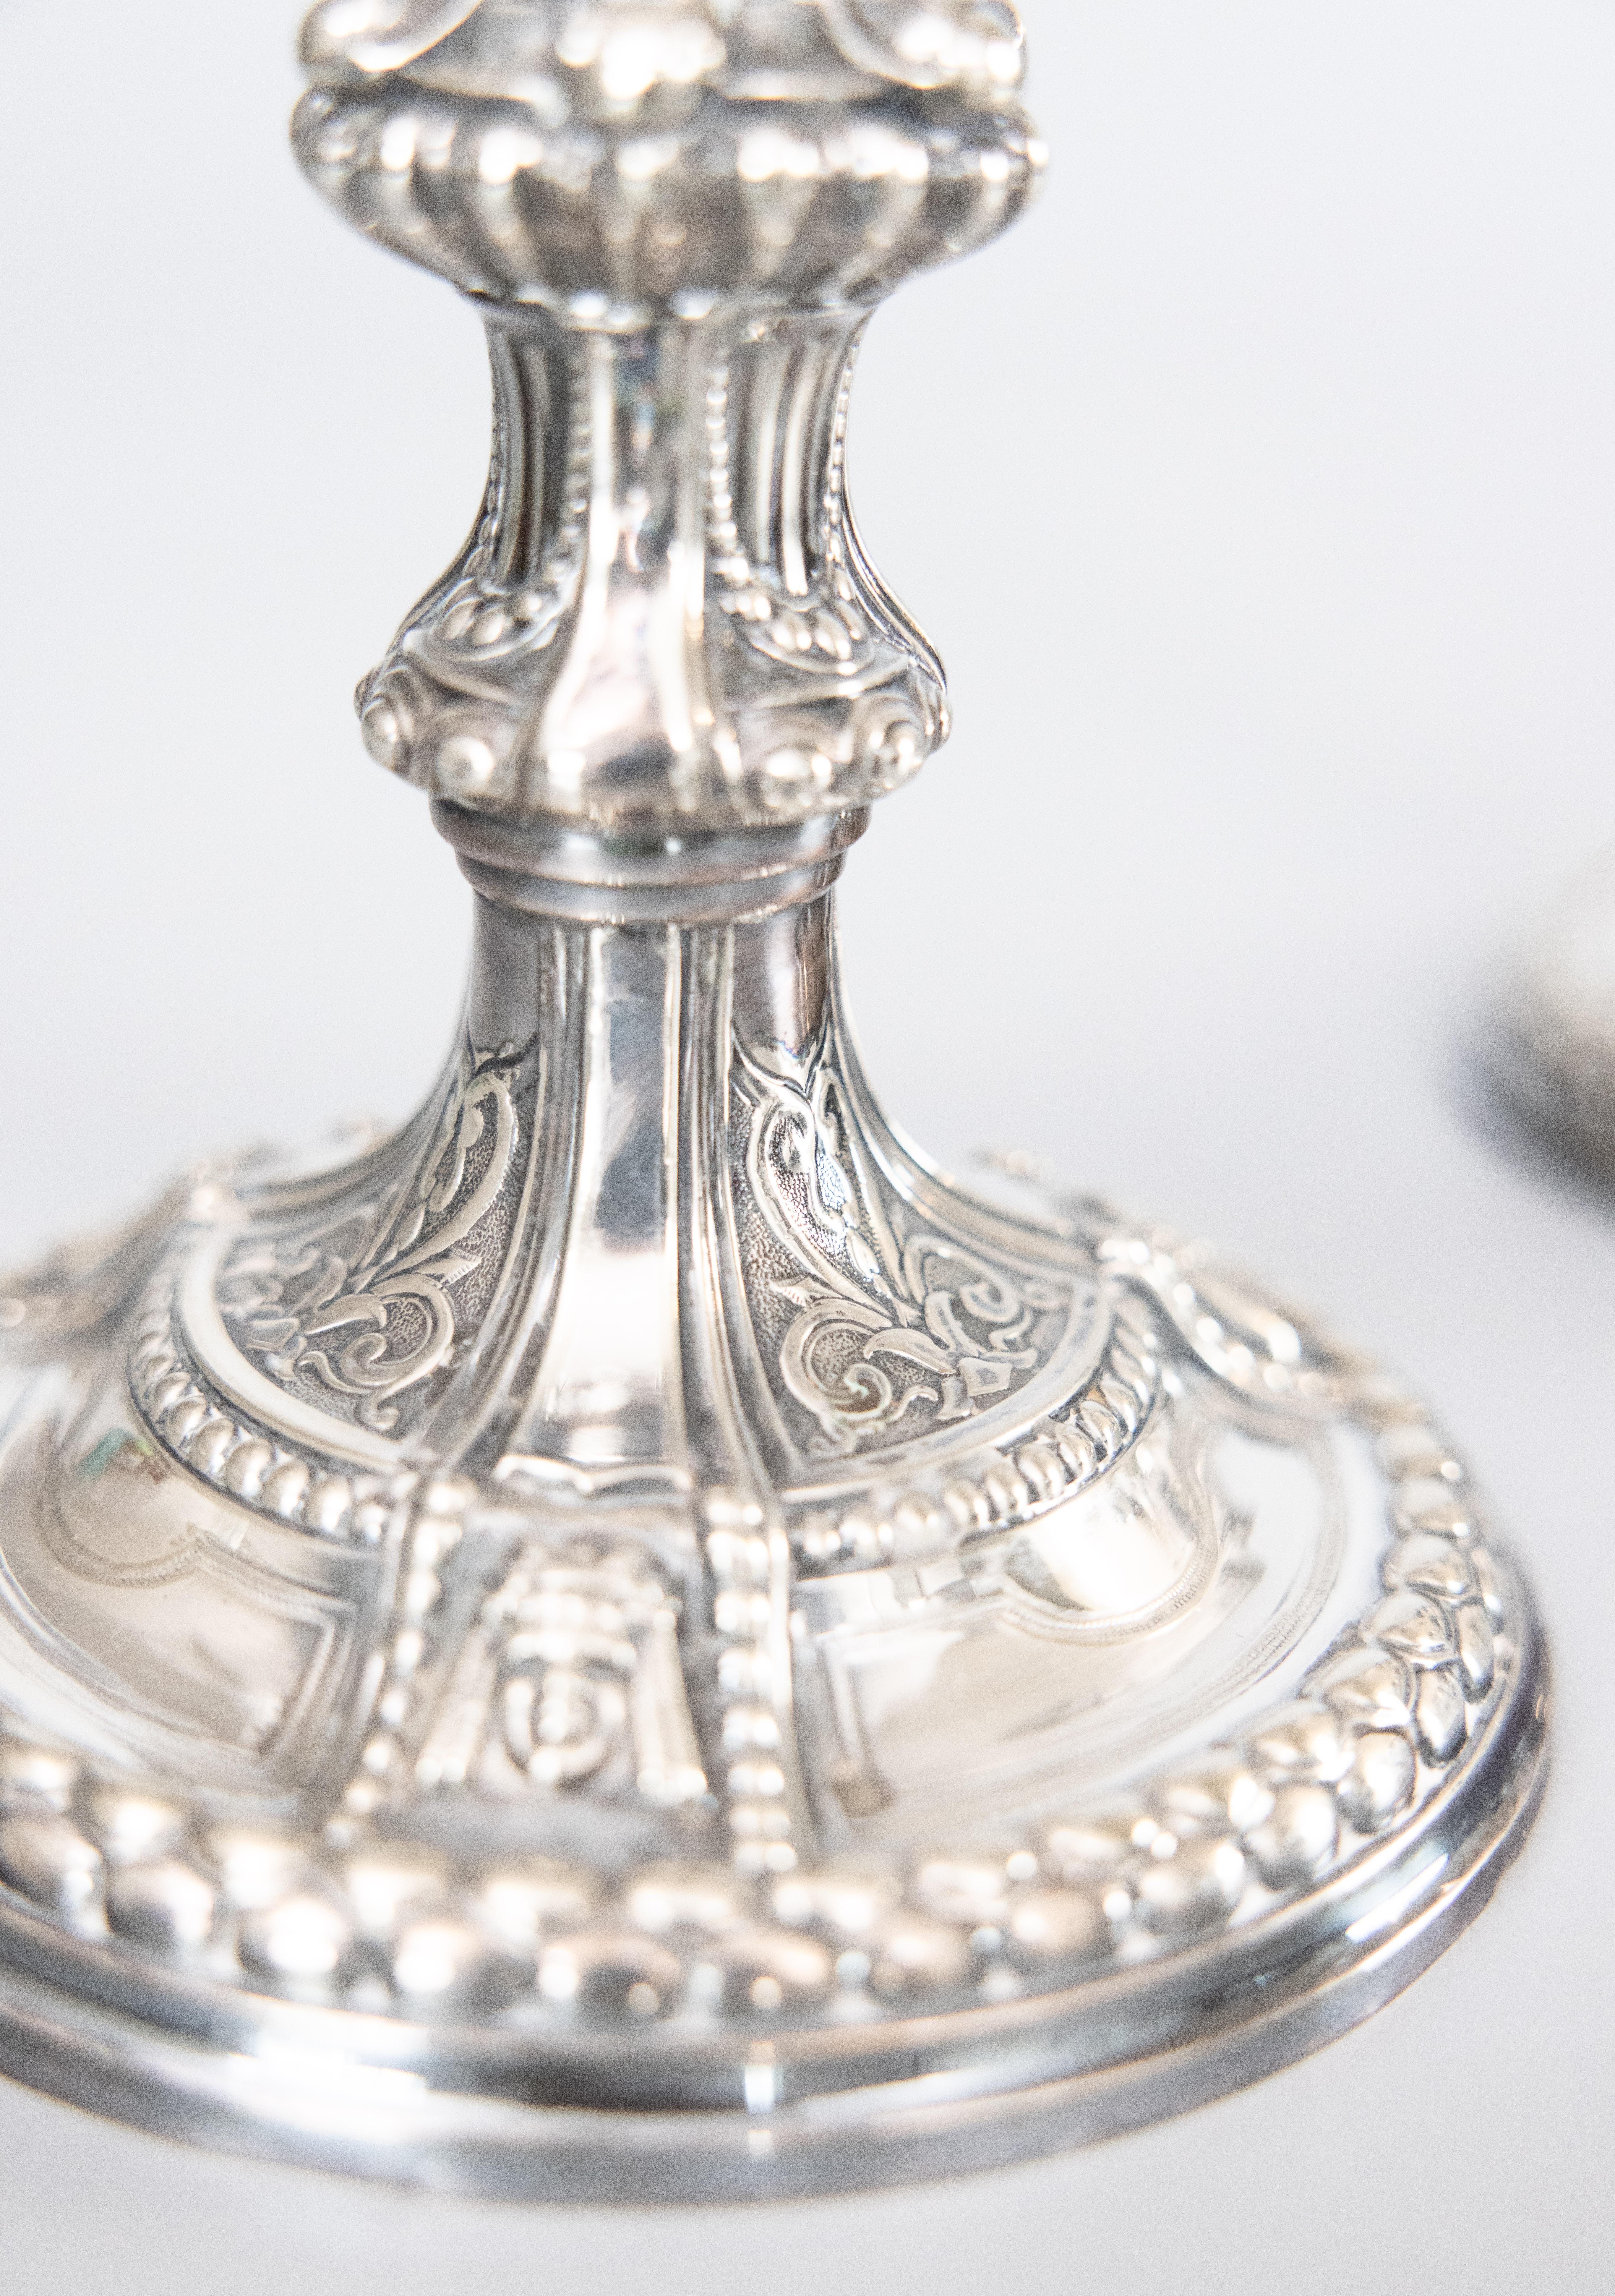 Pair of Antique Neoclassical Style English Silver Plate Candlesticks c. 1900 For Sale 4